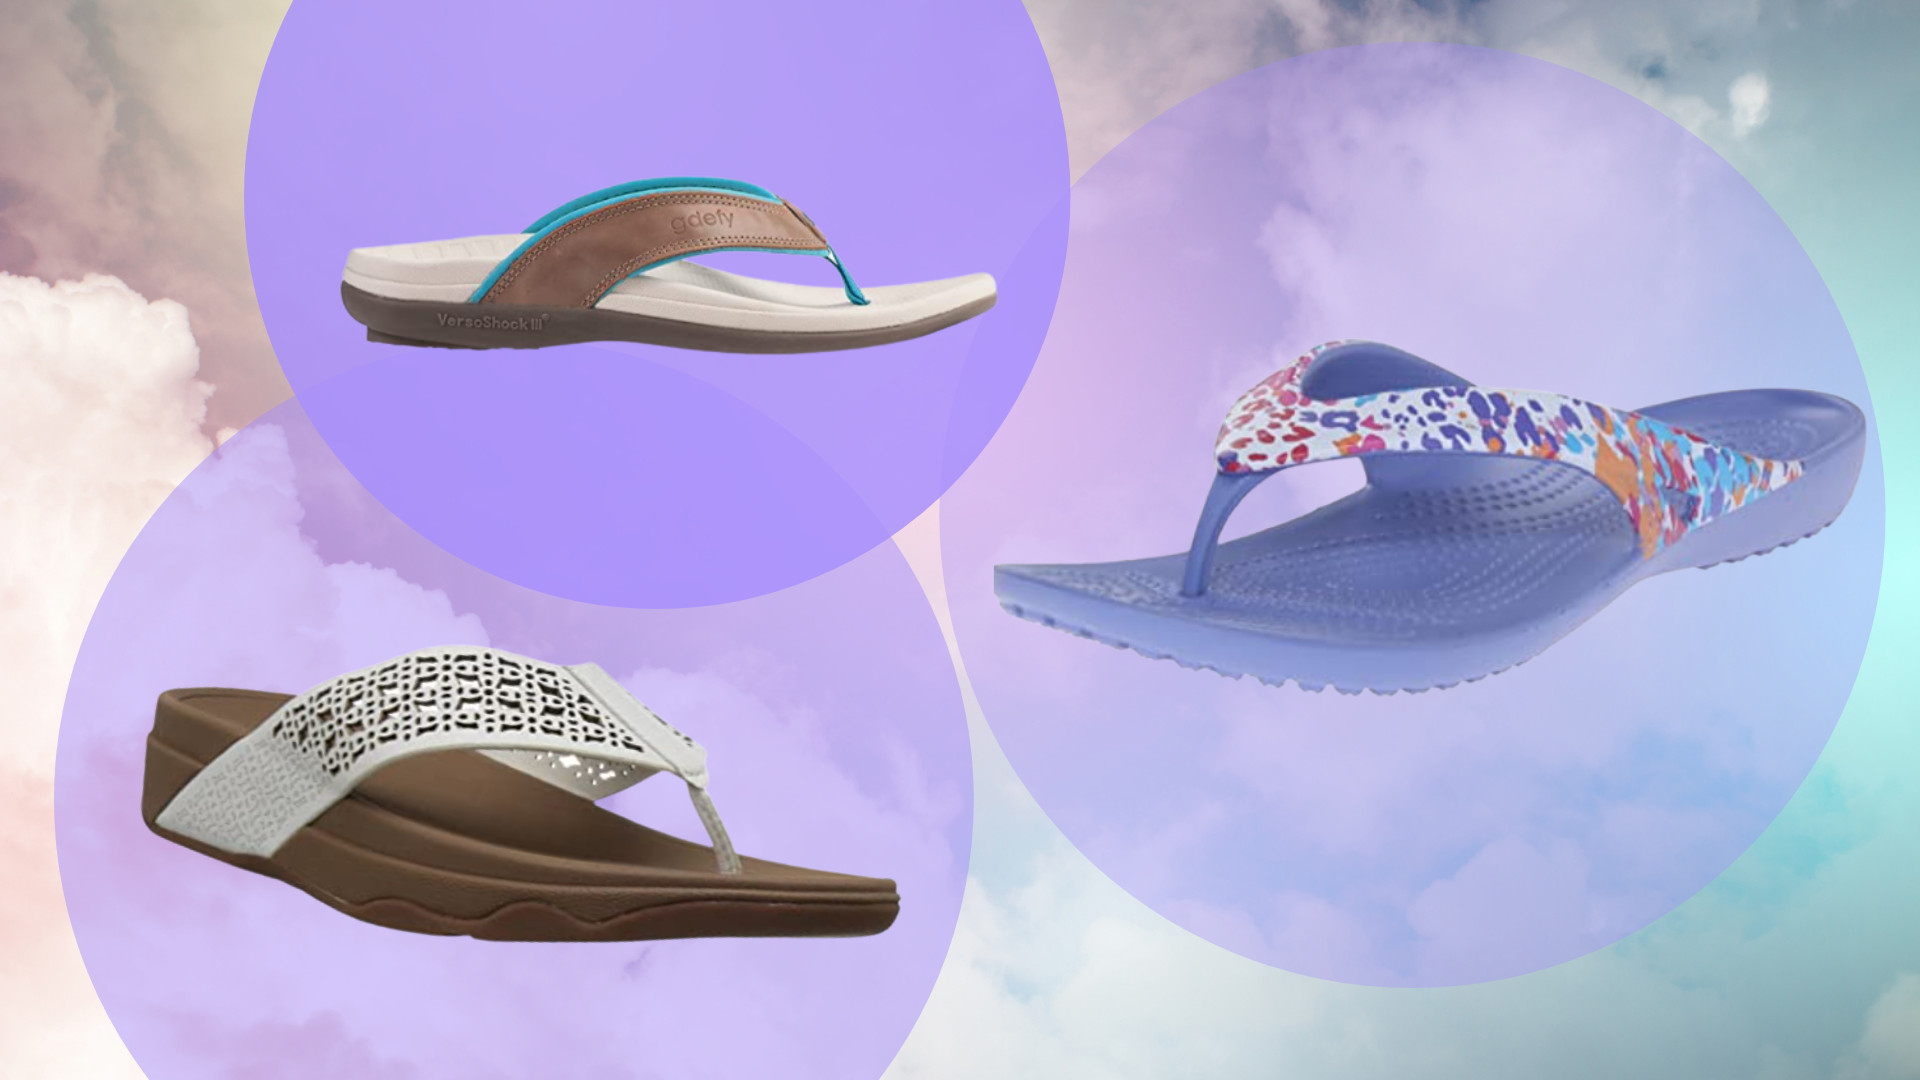 Stay Cool and Comfortable with Best Sandals for Plantar Fasciitis